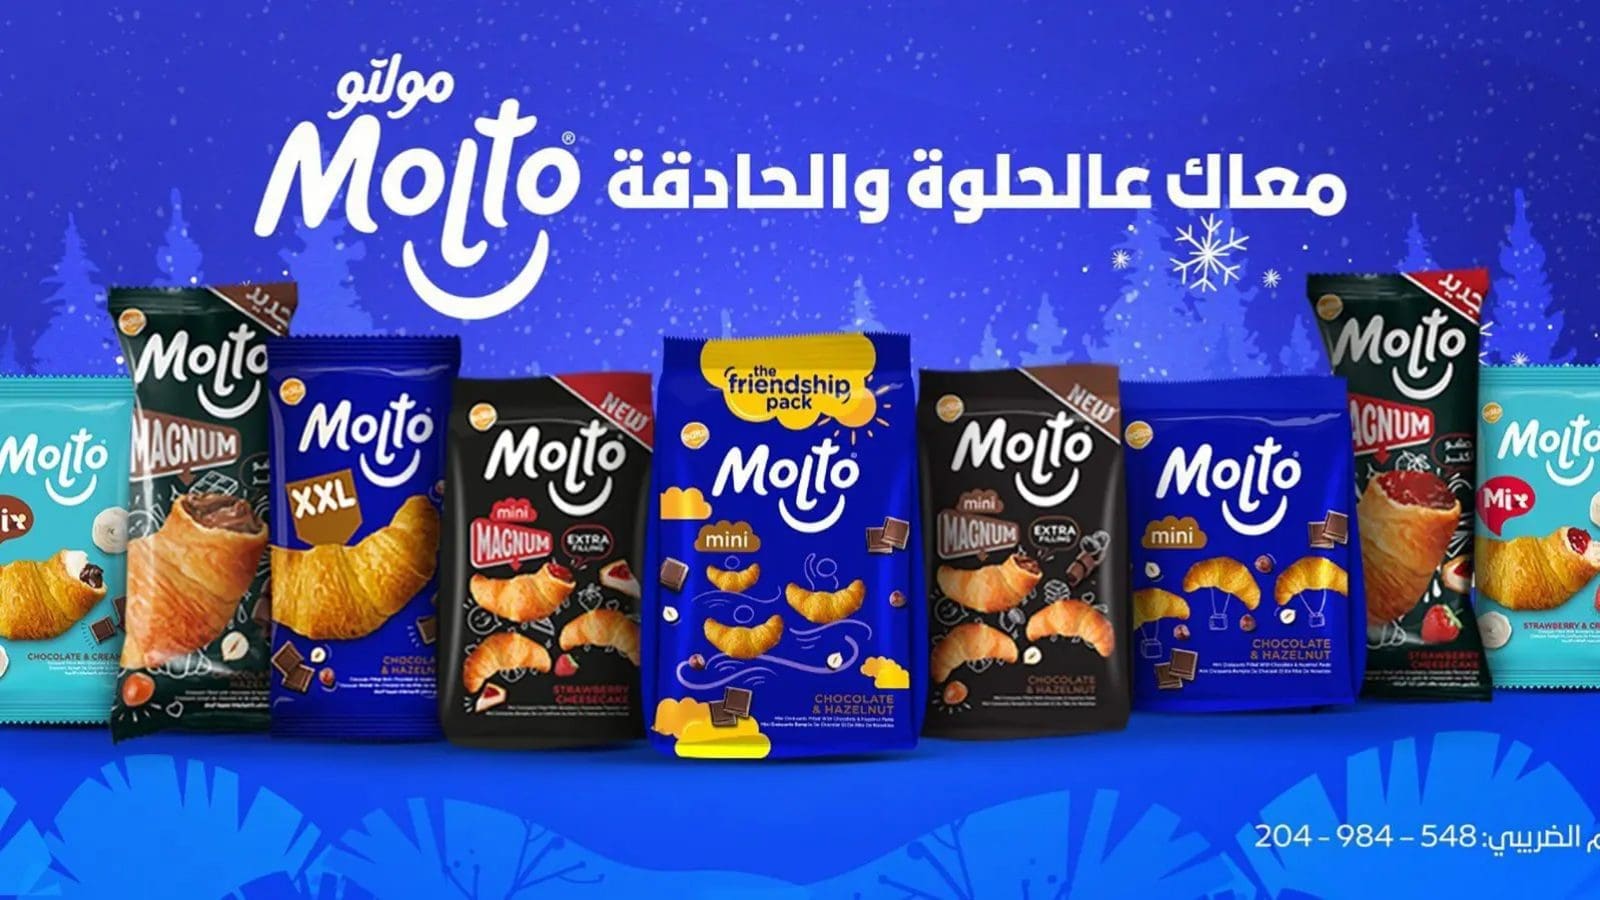 Egyptian snacks giant Edita Food records US$31.3M in net profits for 2022